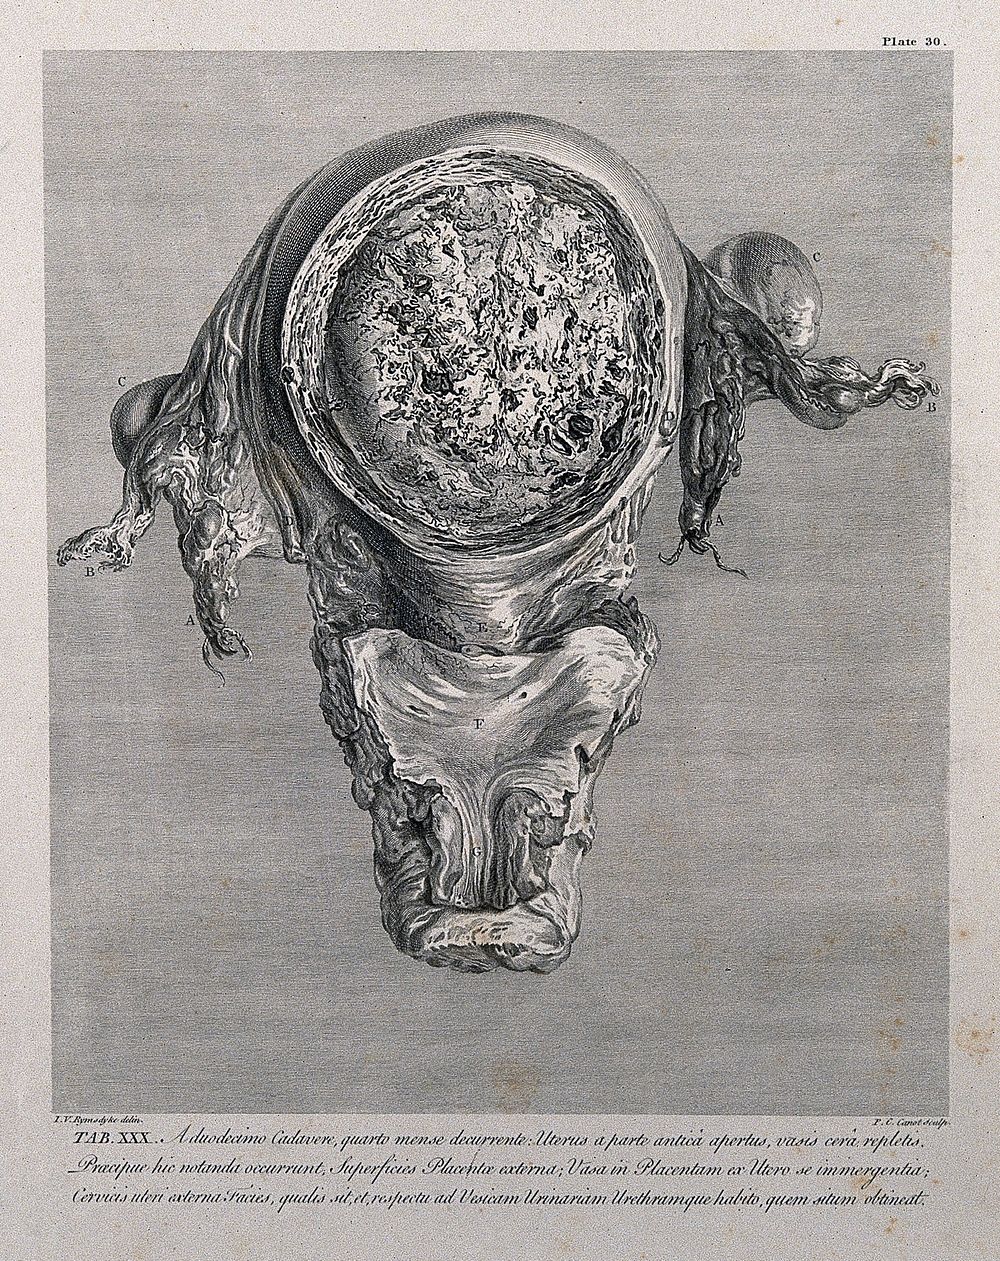 Dissection of the pregnant uterus at five months, showing the placenta and the cervix, in relation to the bladder and…